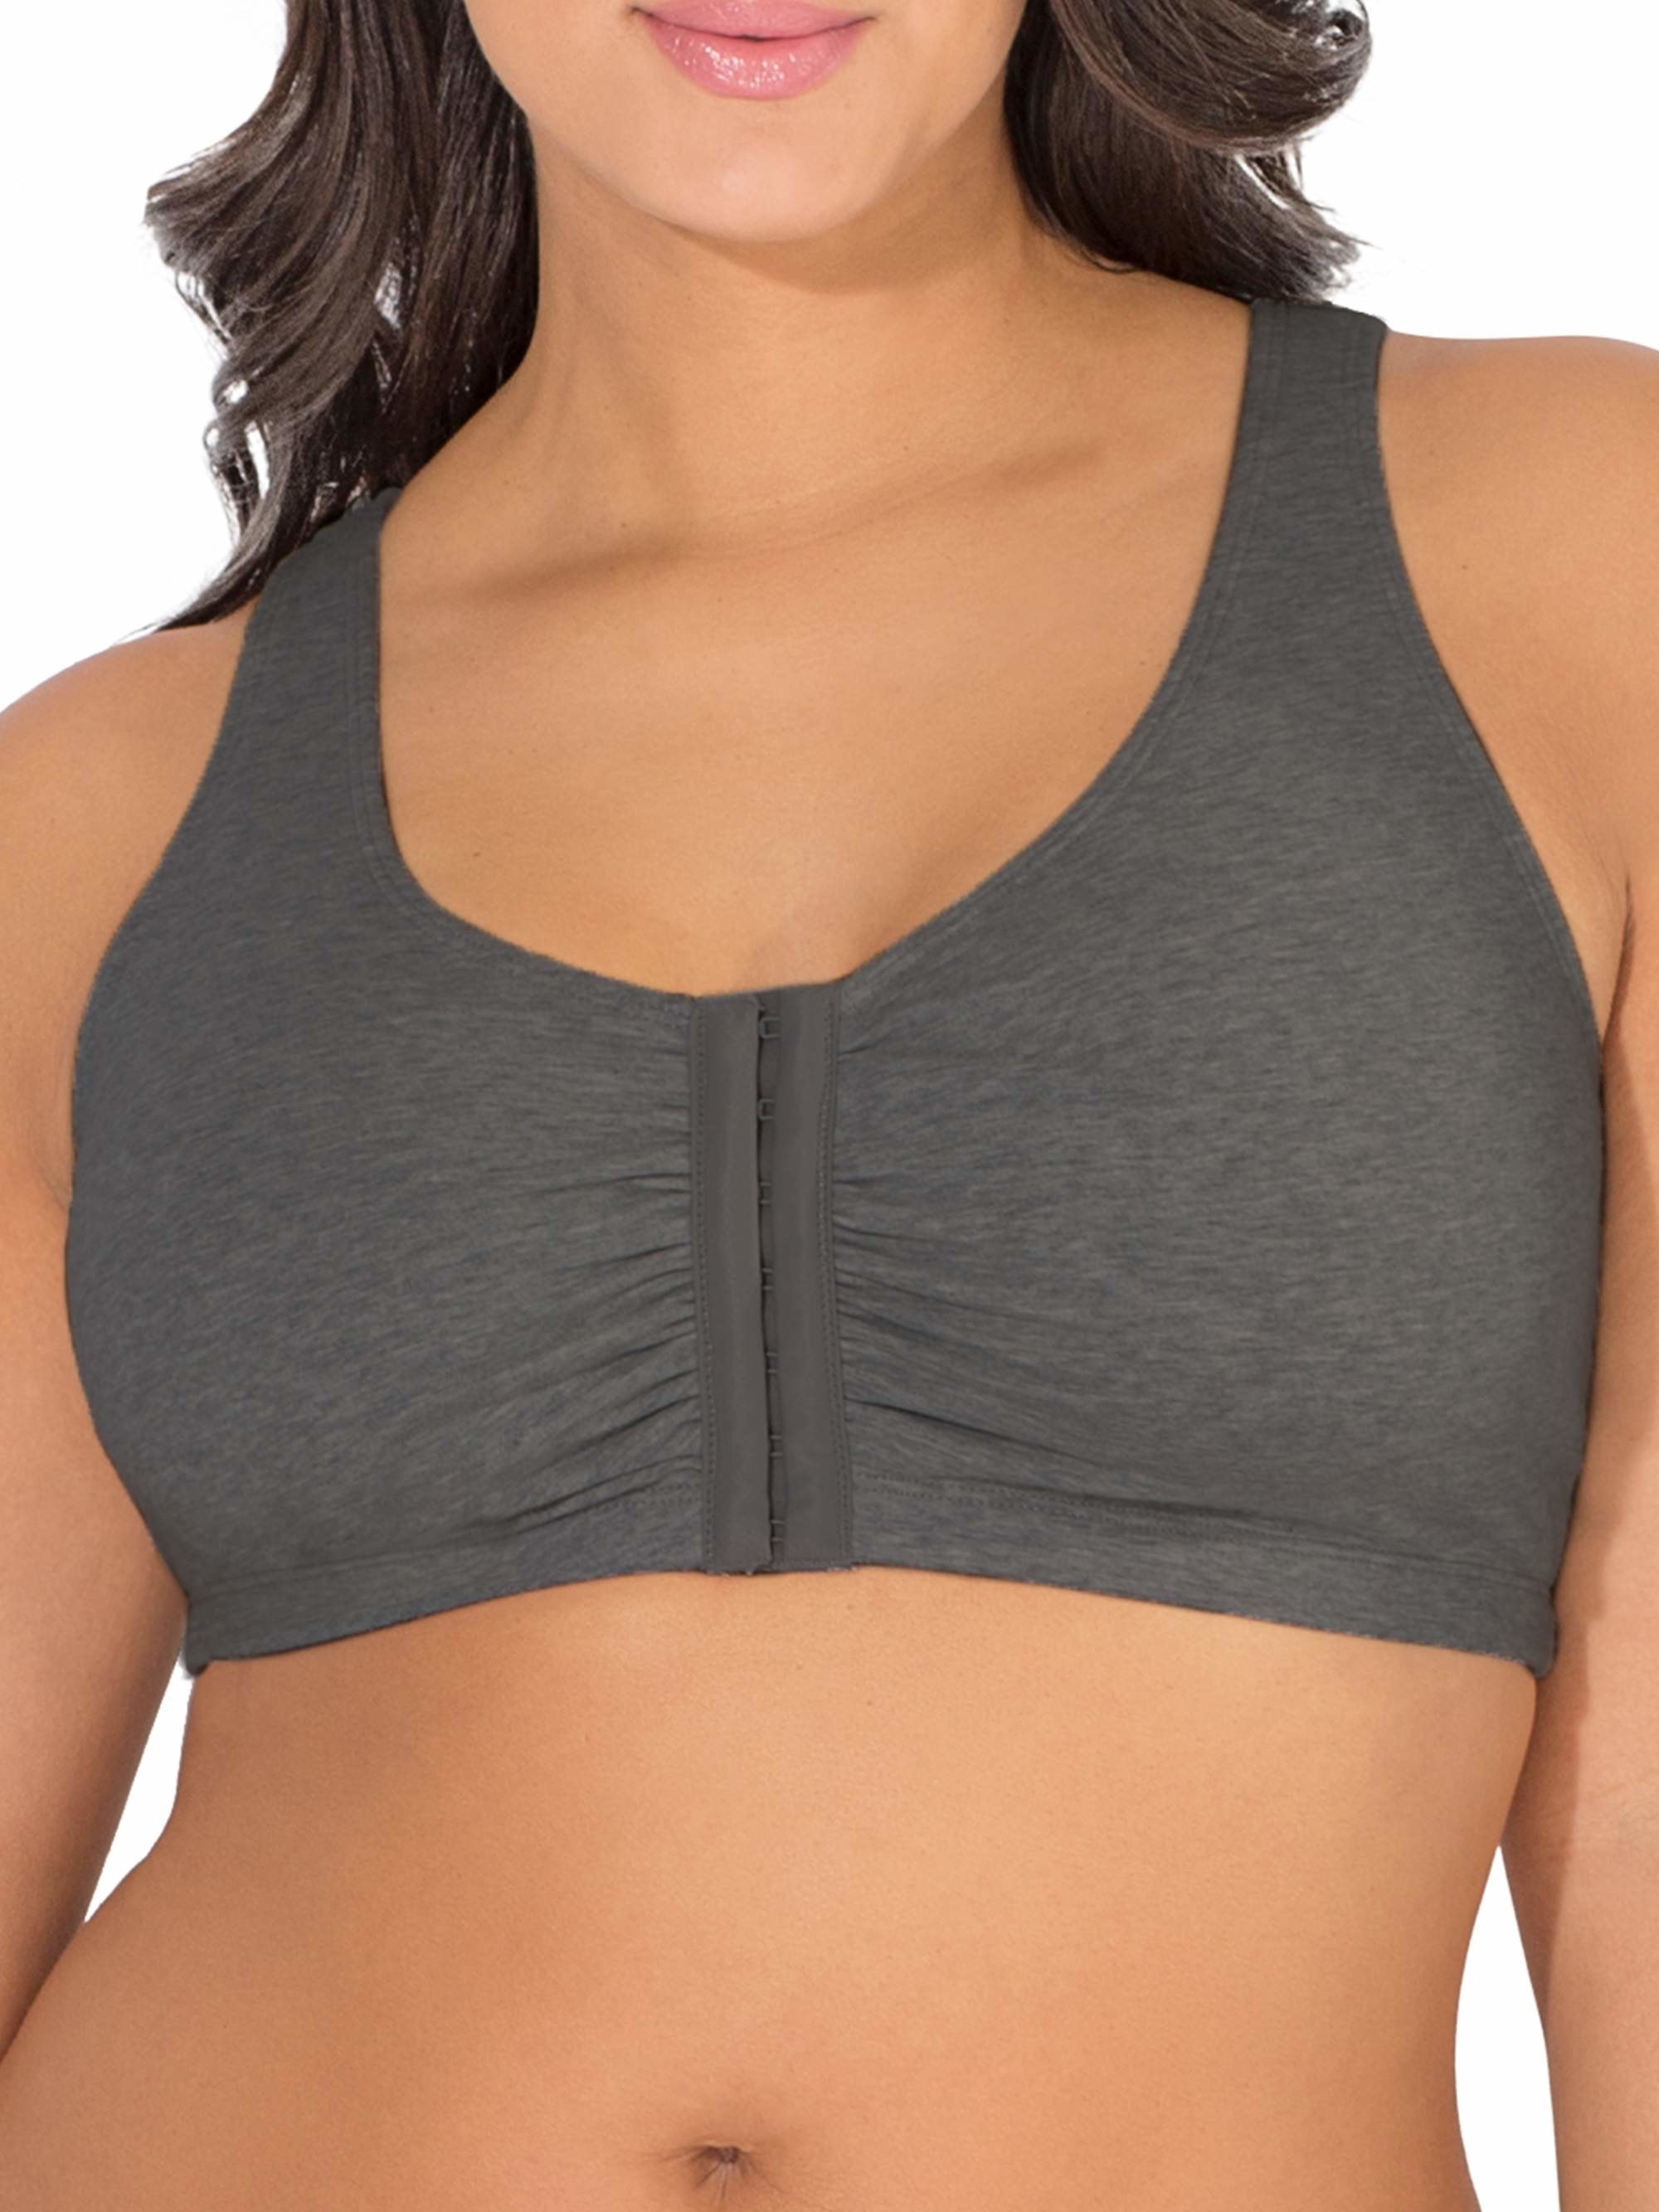 The grey ruched sports bra